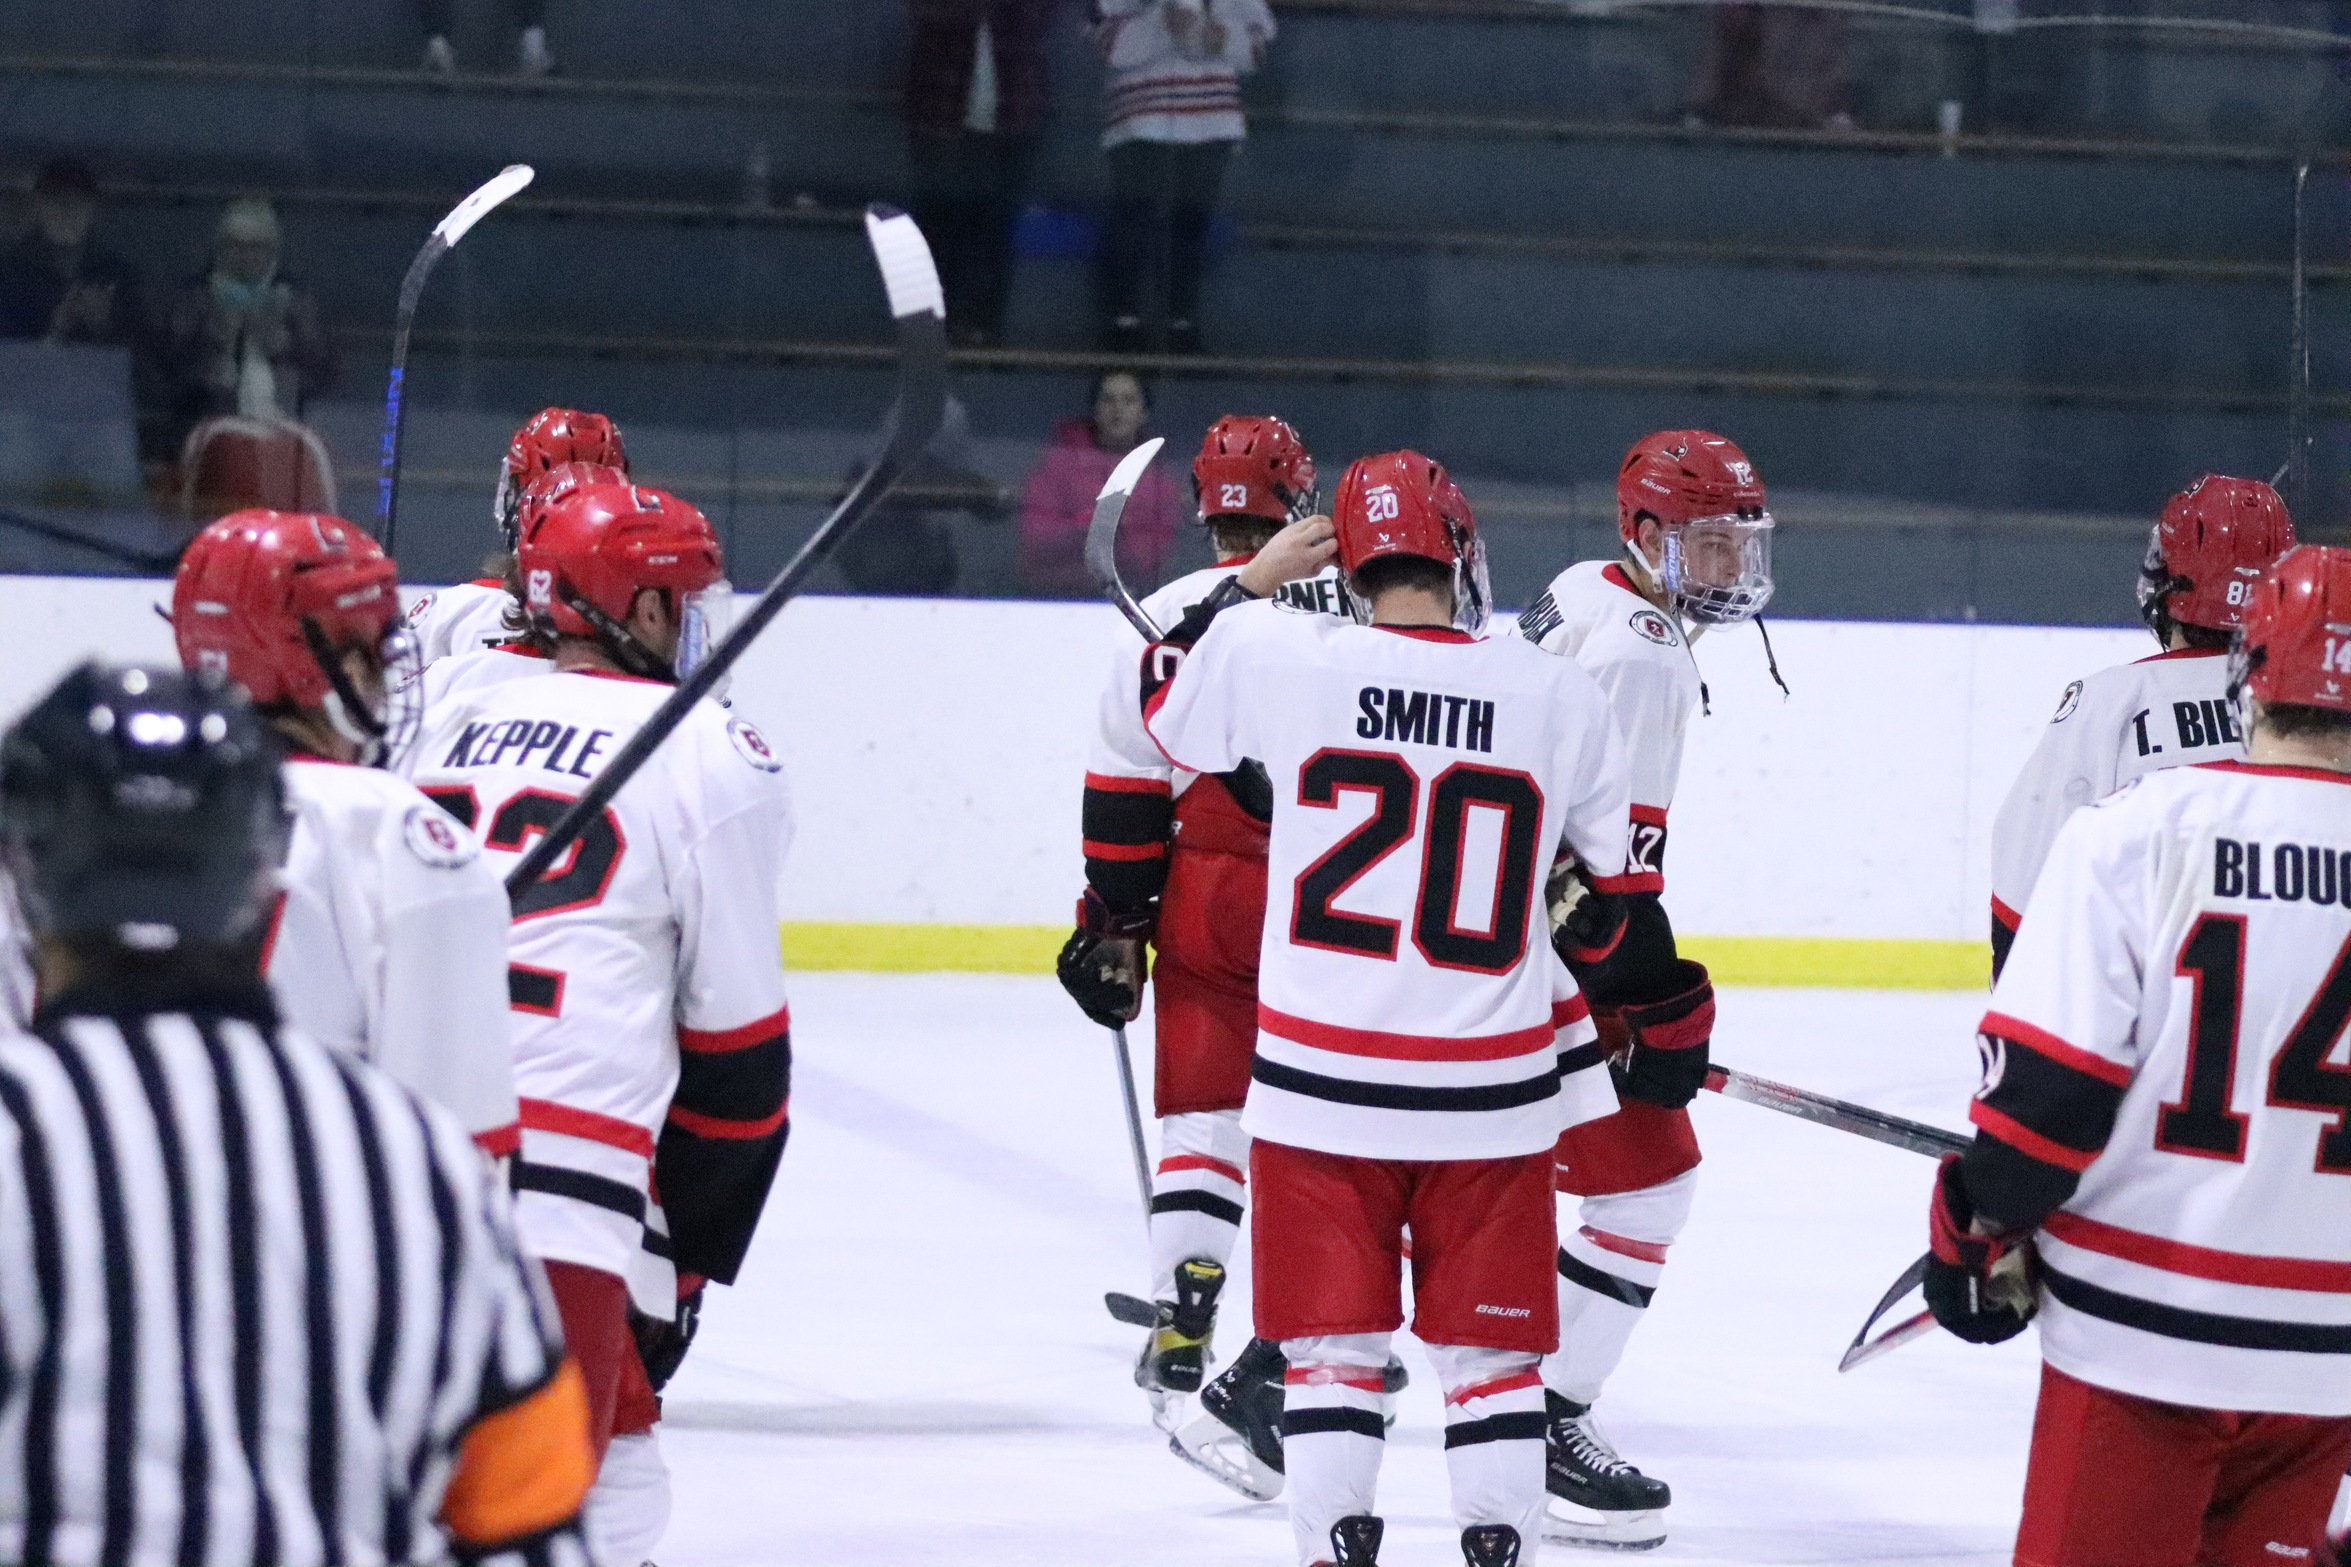 Men's Hockey falls to #18 UM-Dearborn in WHAC Championship